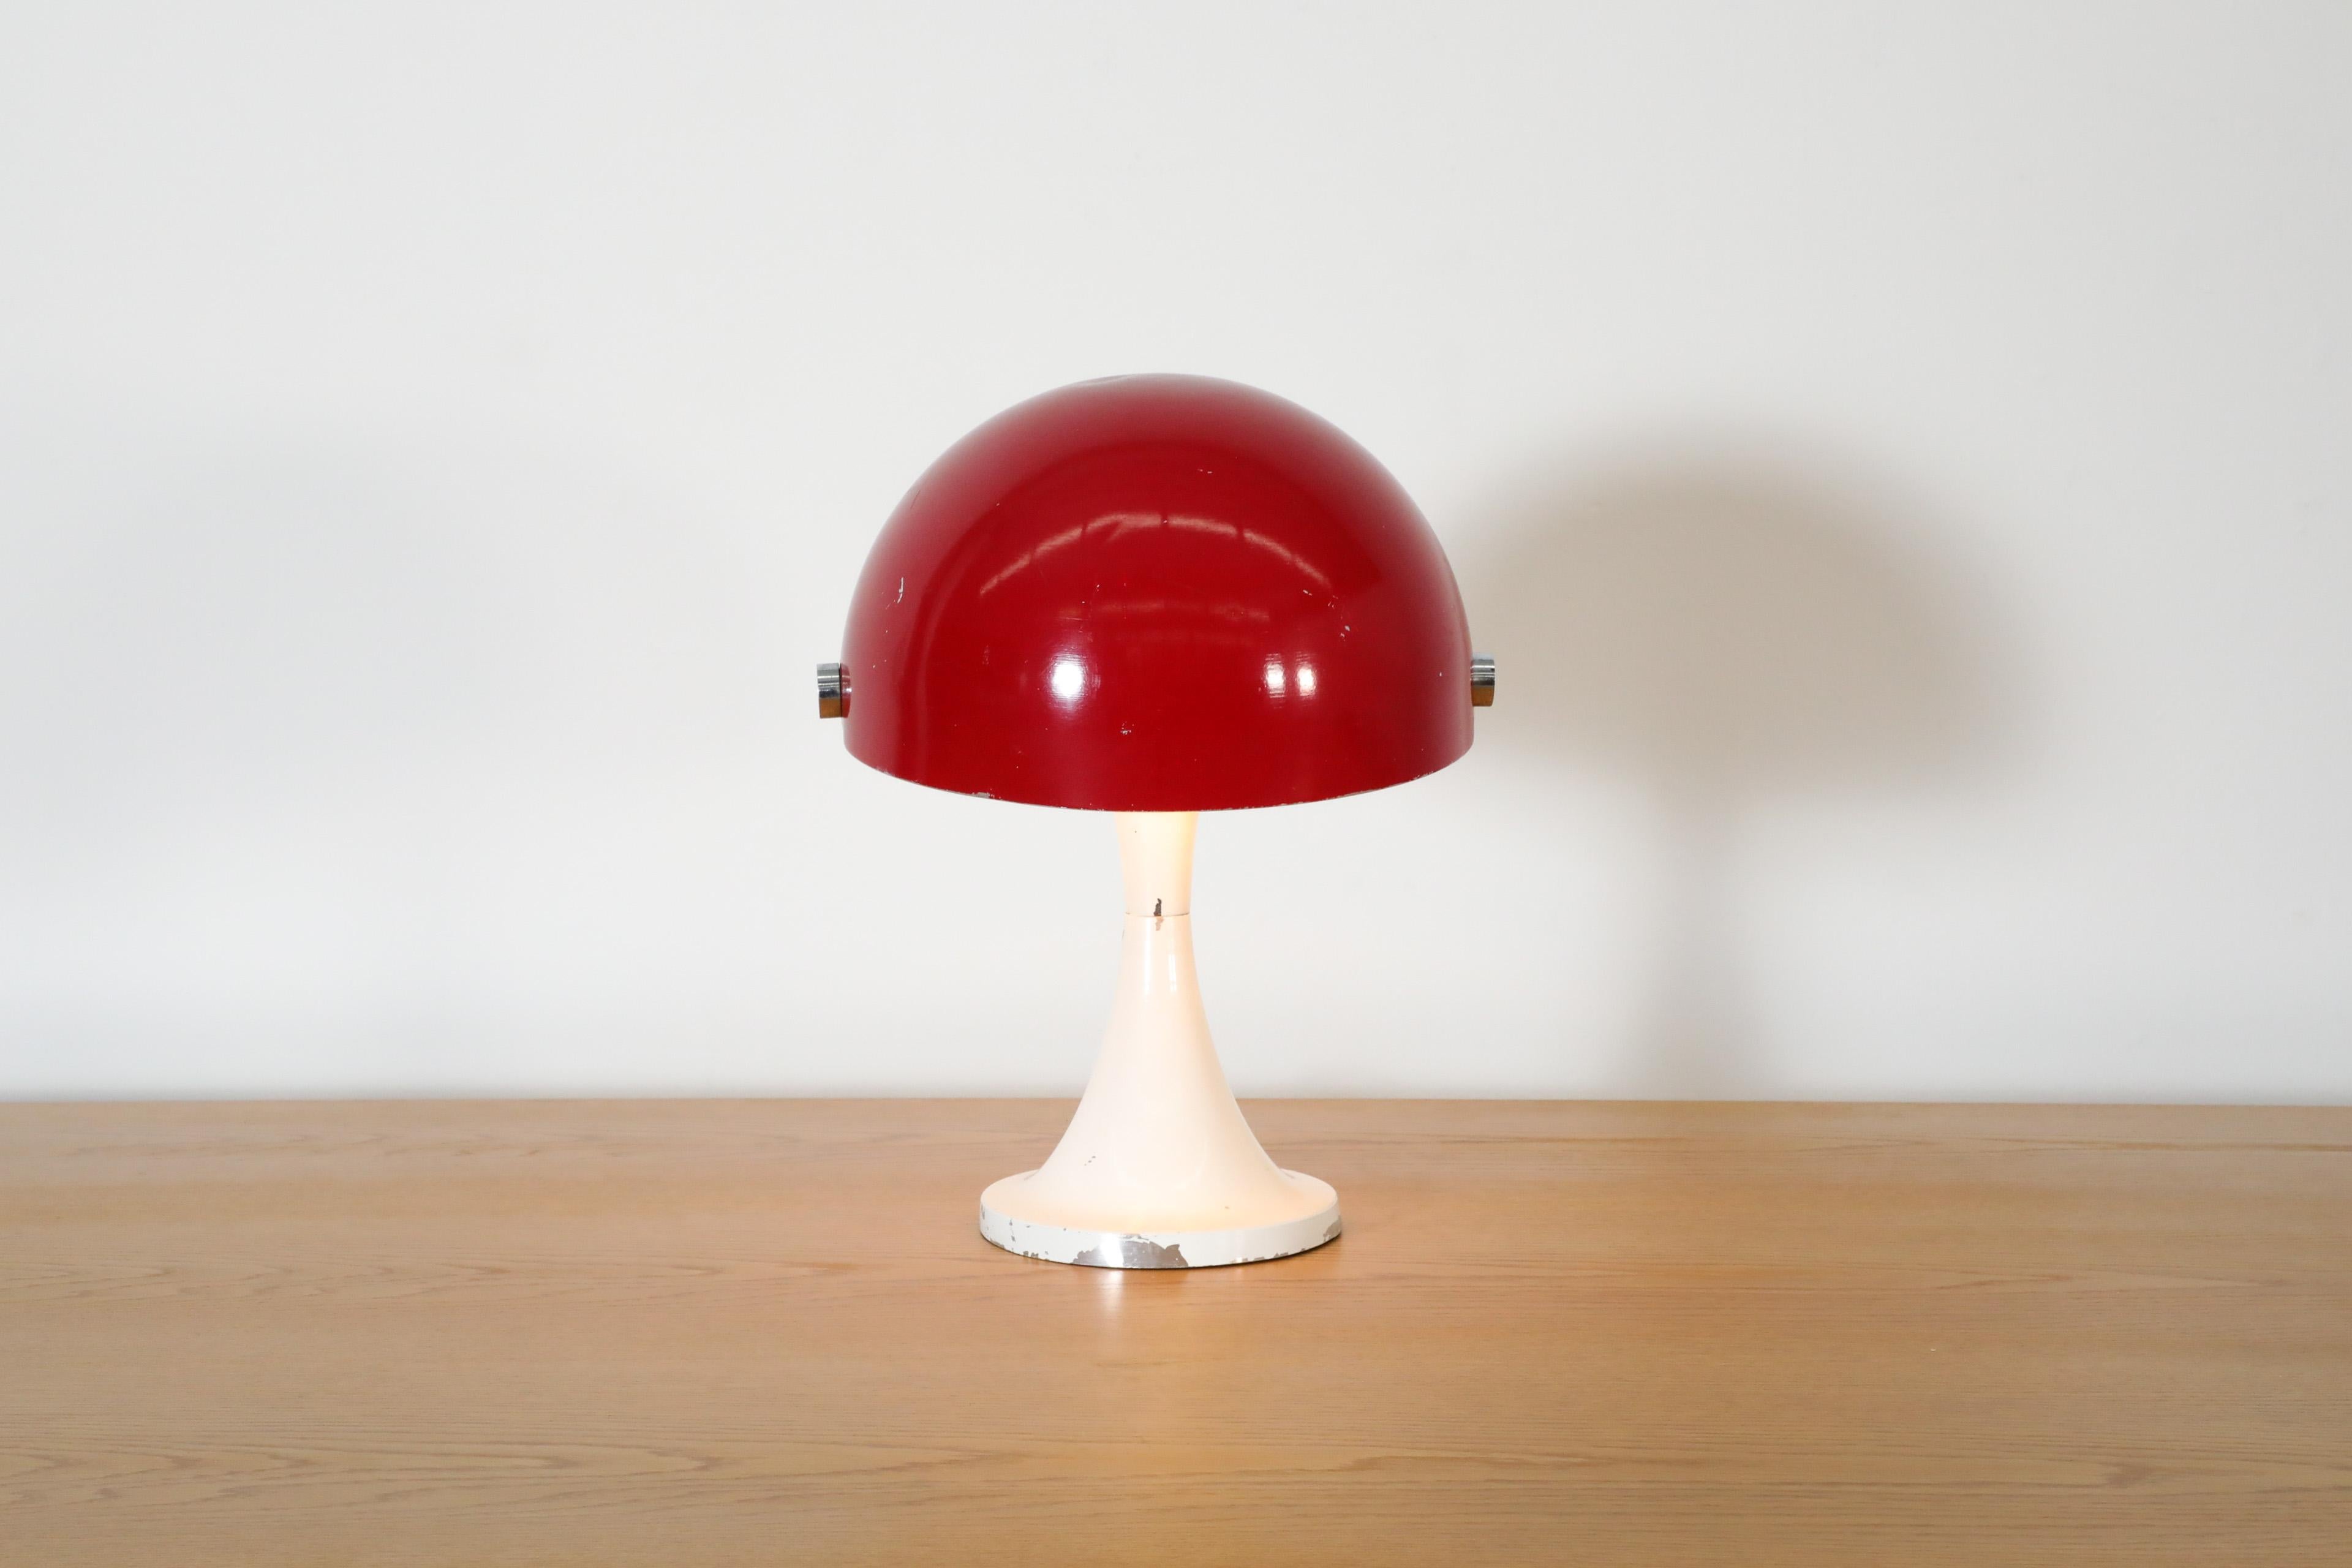 Elio Martinelli style table lamp with red enameled metal helmet shade with a weighted white enameled metal tulip base and chrome accents. Very similar to Martinelli's model 685 table lamp. The helmet shade can be rotated to divert light, front to